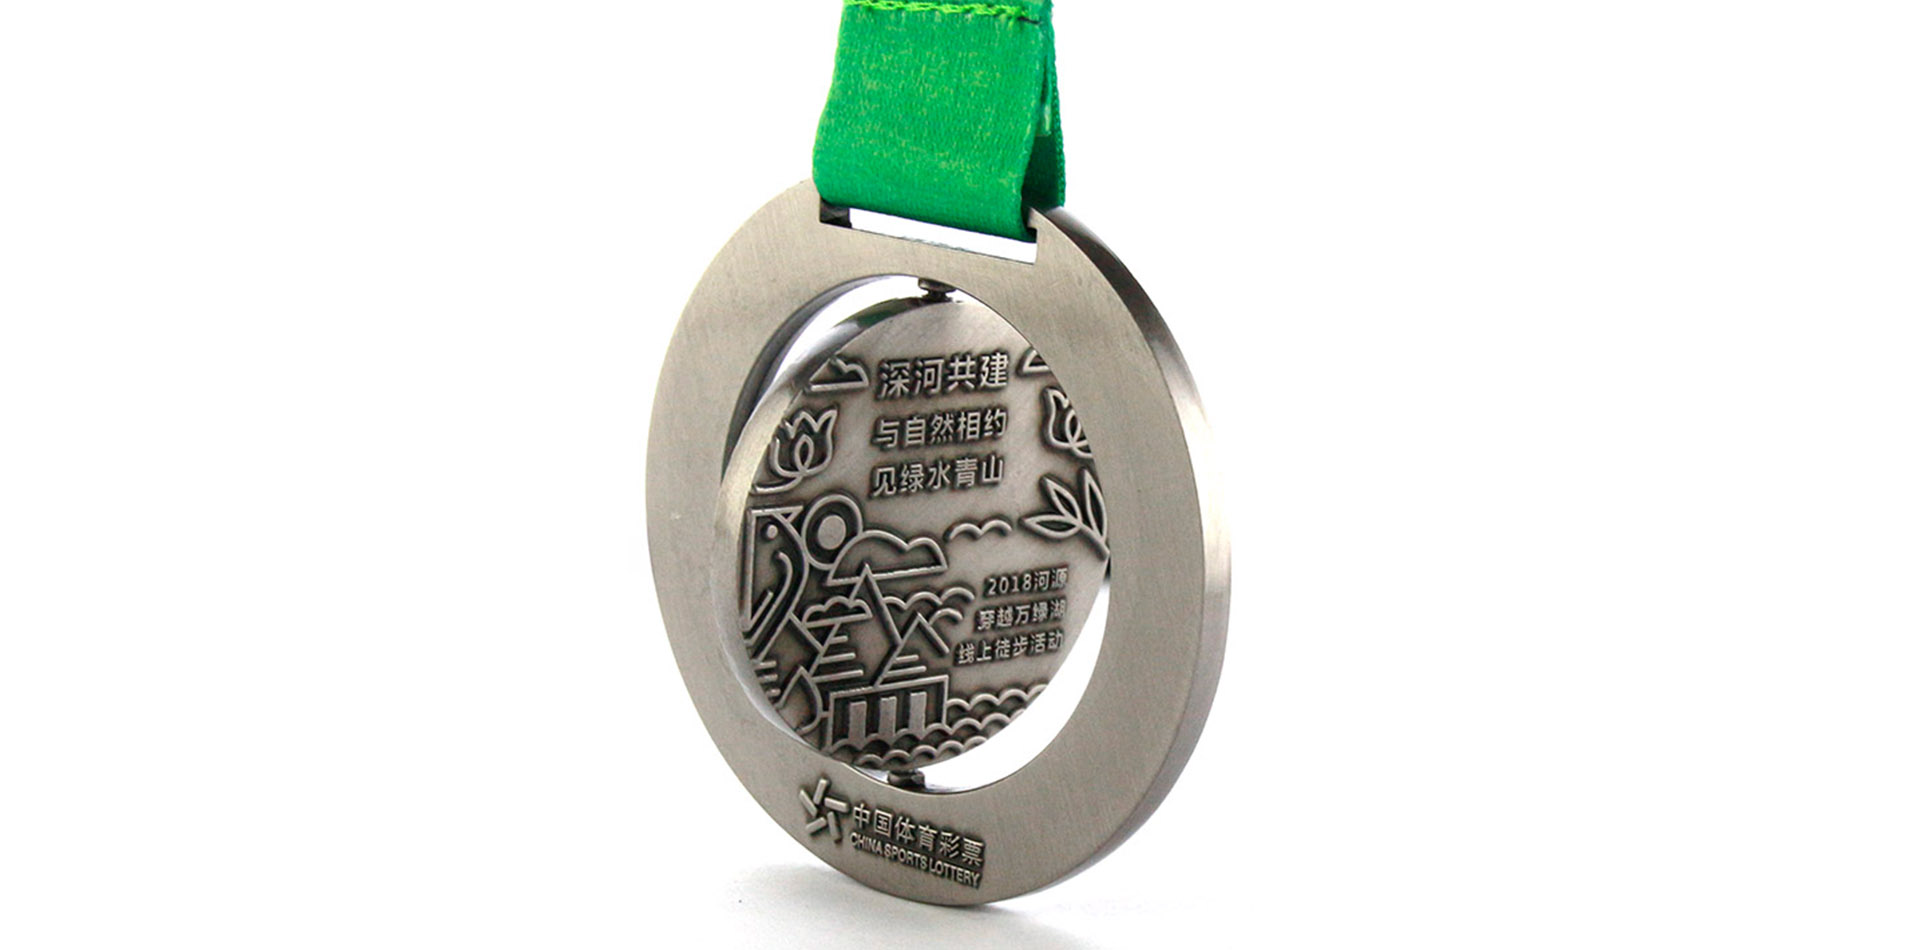 ArtiGifts: Elevating Excellence with Custom Metal Medals